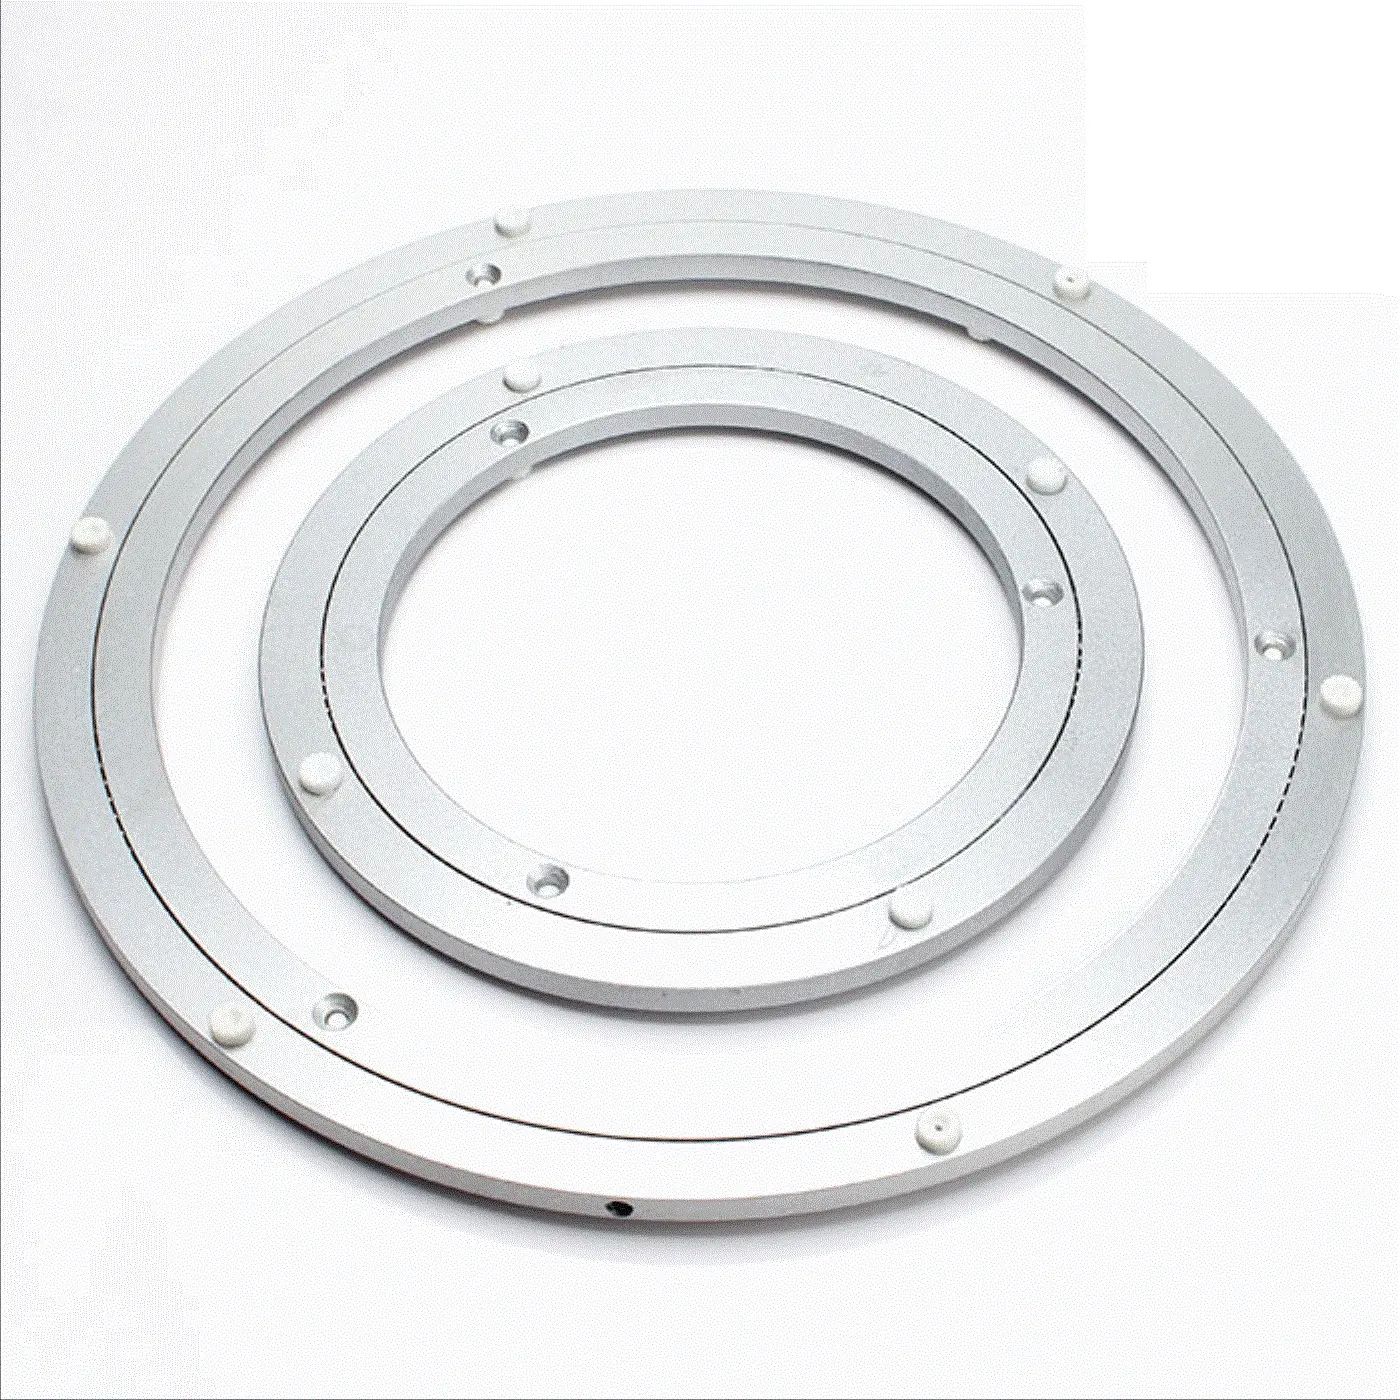 Low noise aluminum 120mm 140mm 200mm lazy susan turntable bearings